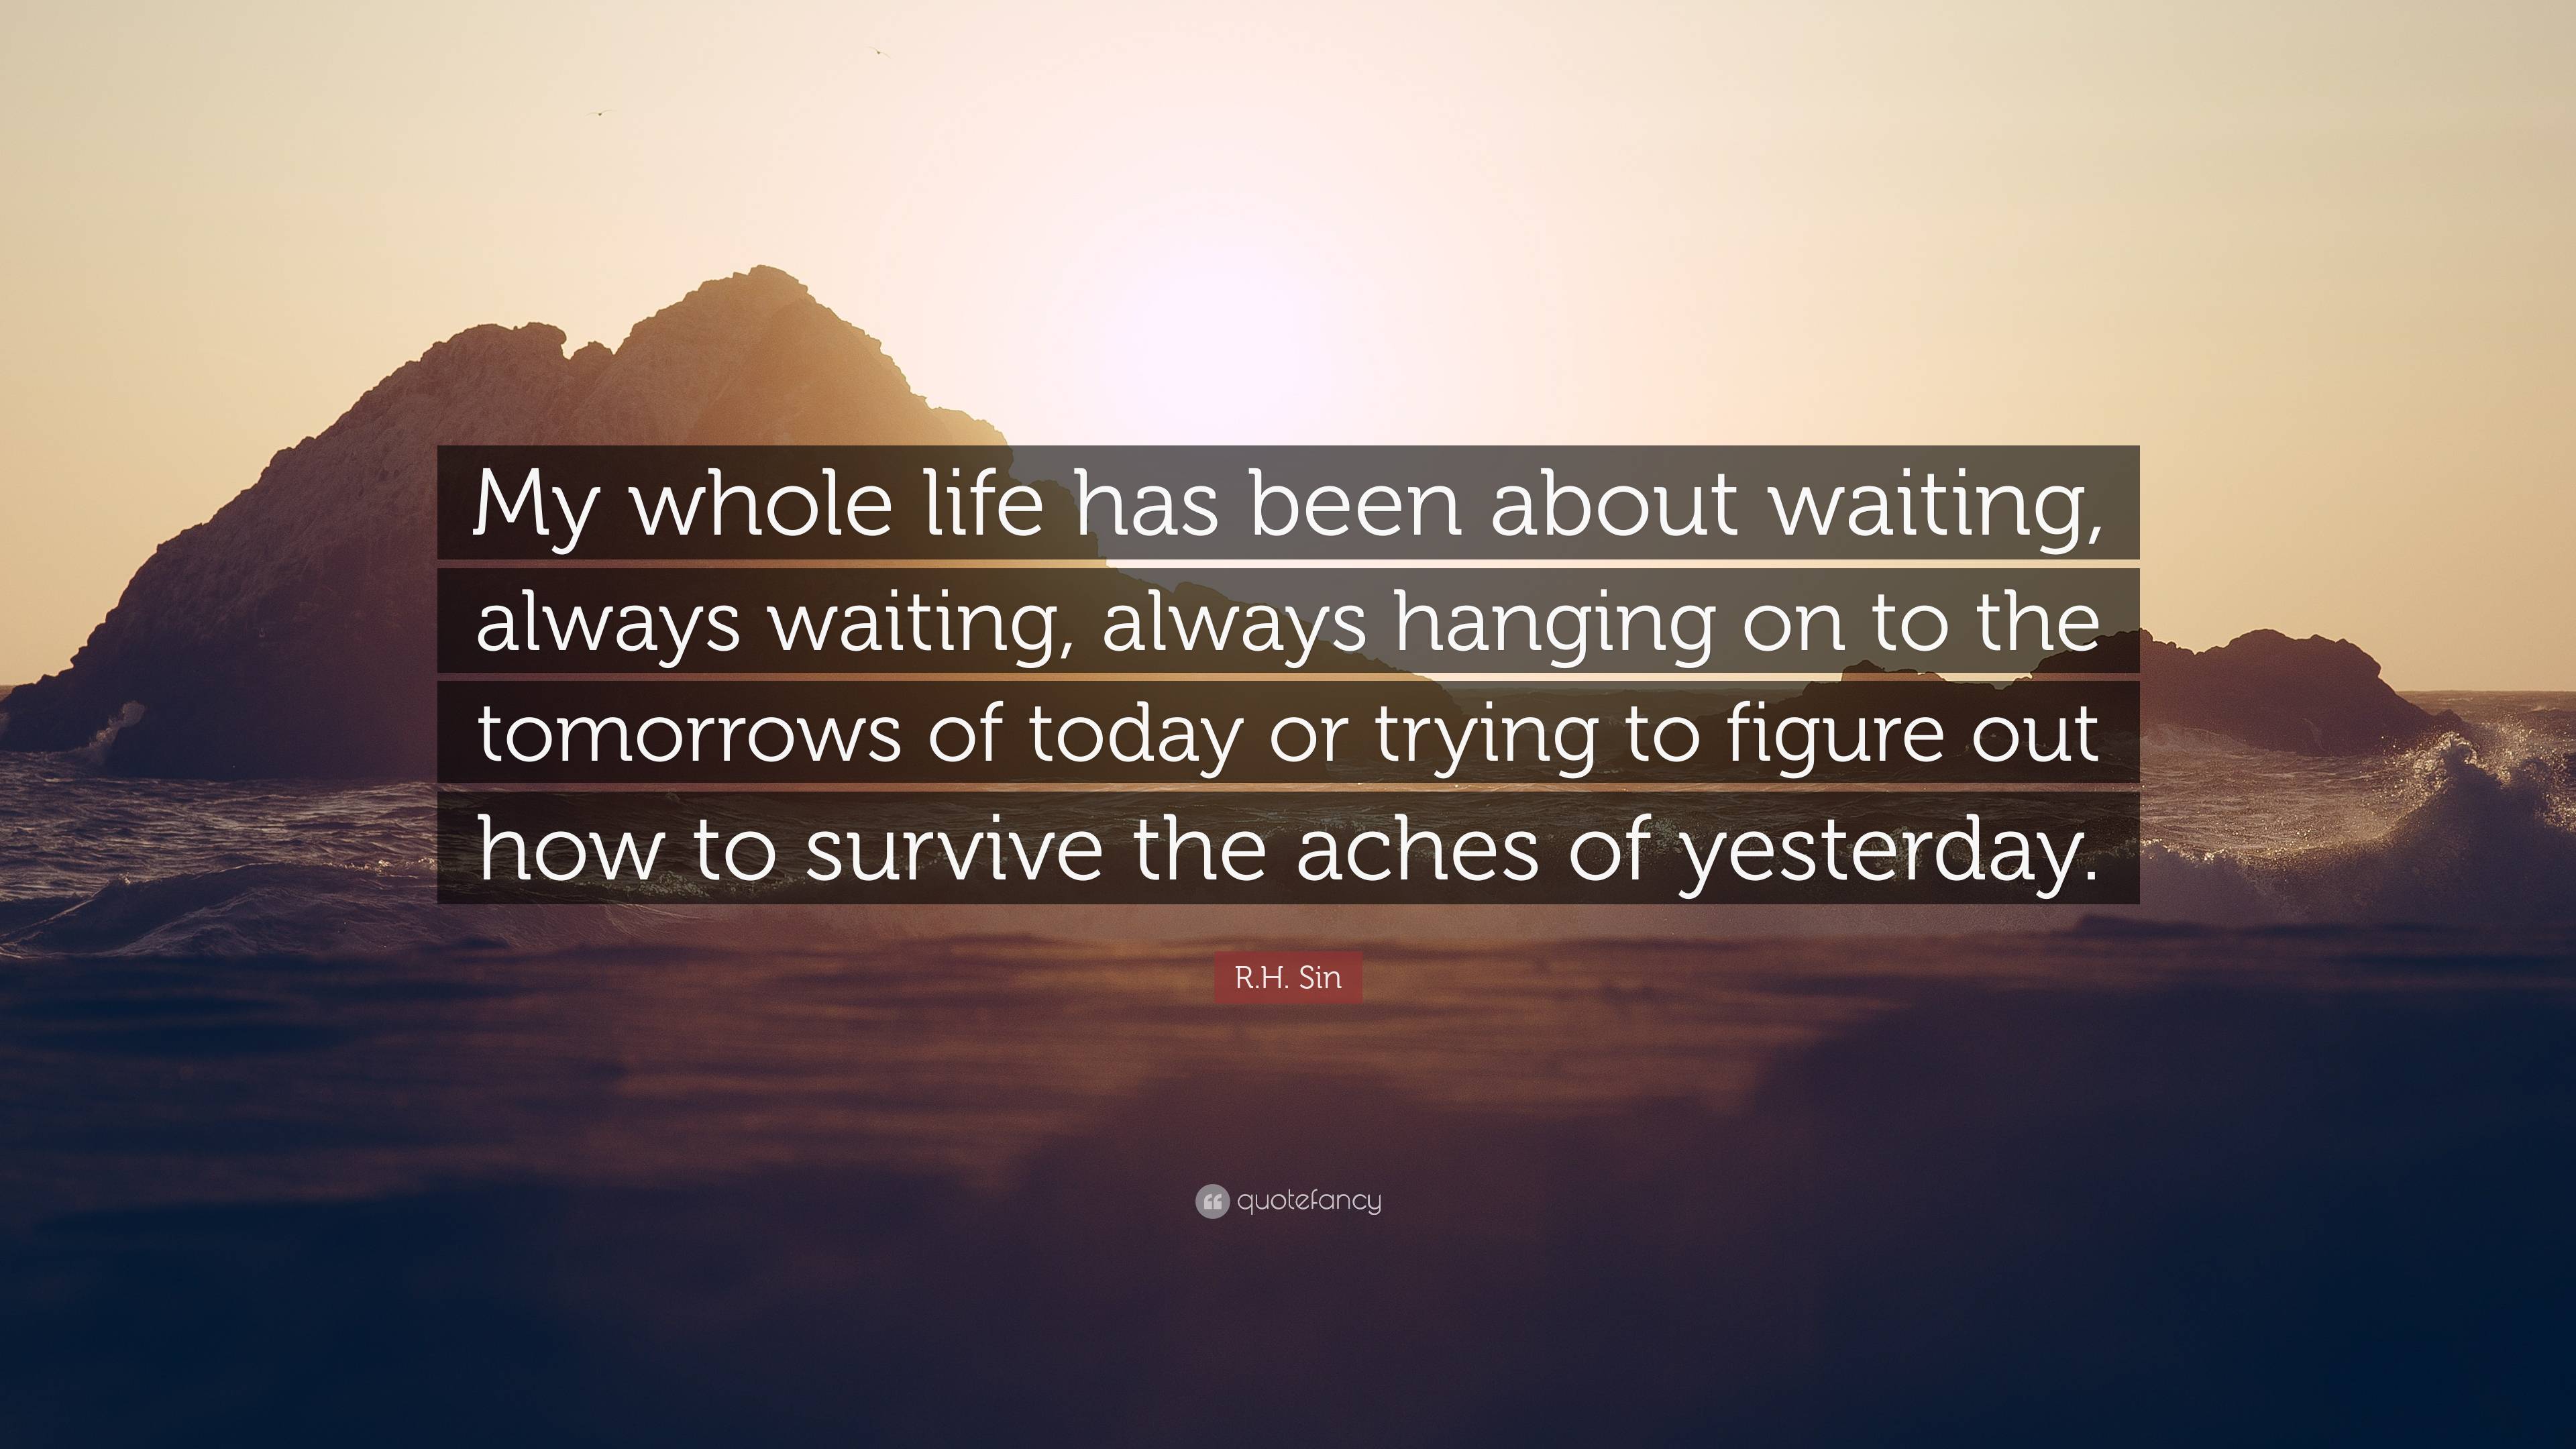 R.H. Sin Quote: “My whole life has been about waiting, always waiting ...